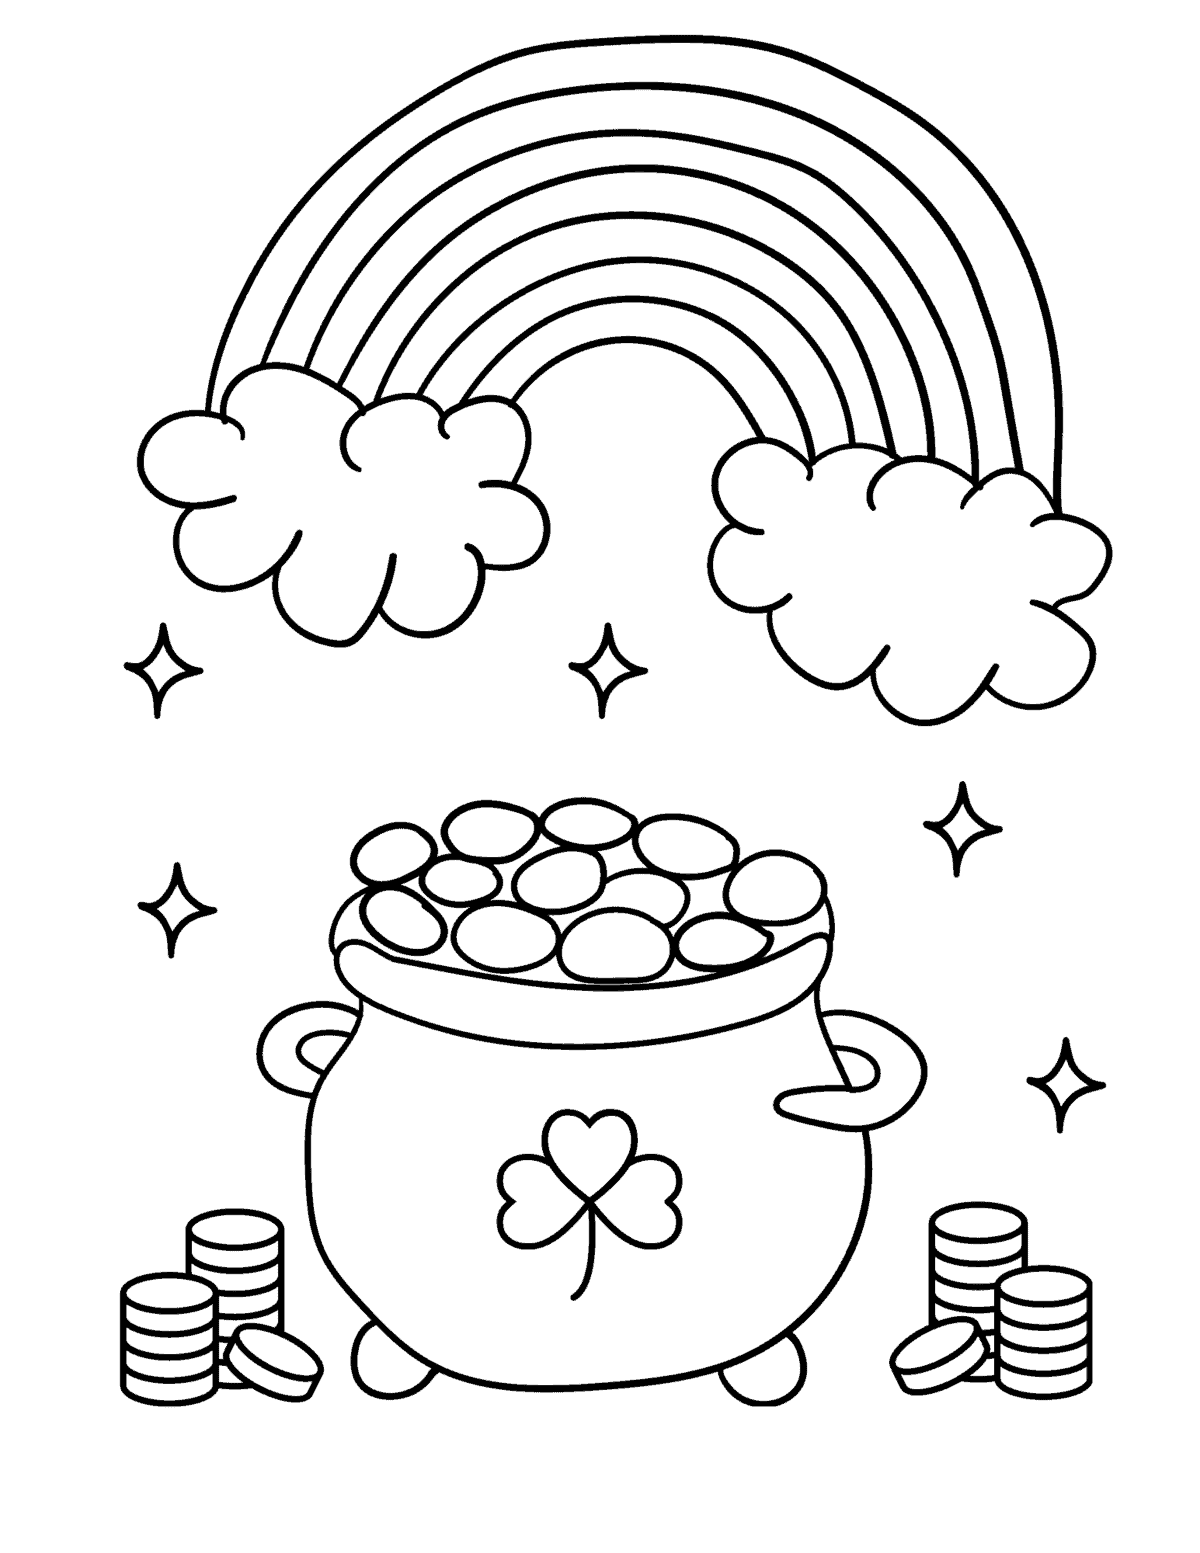 st patrick's day coloring page